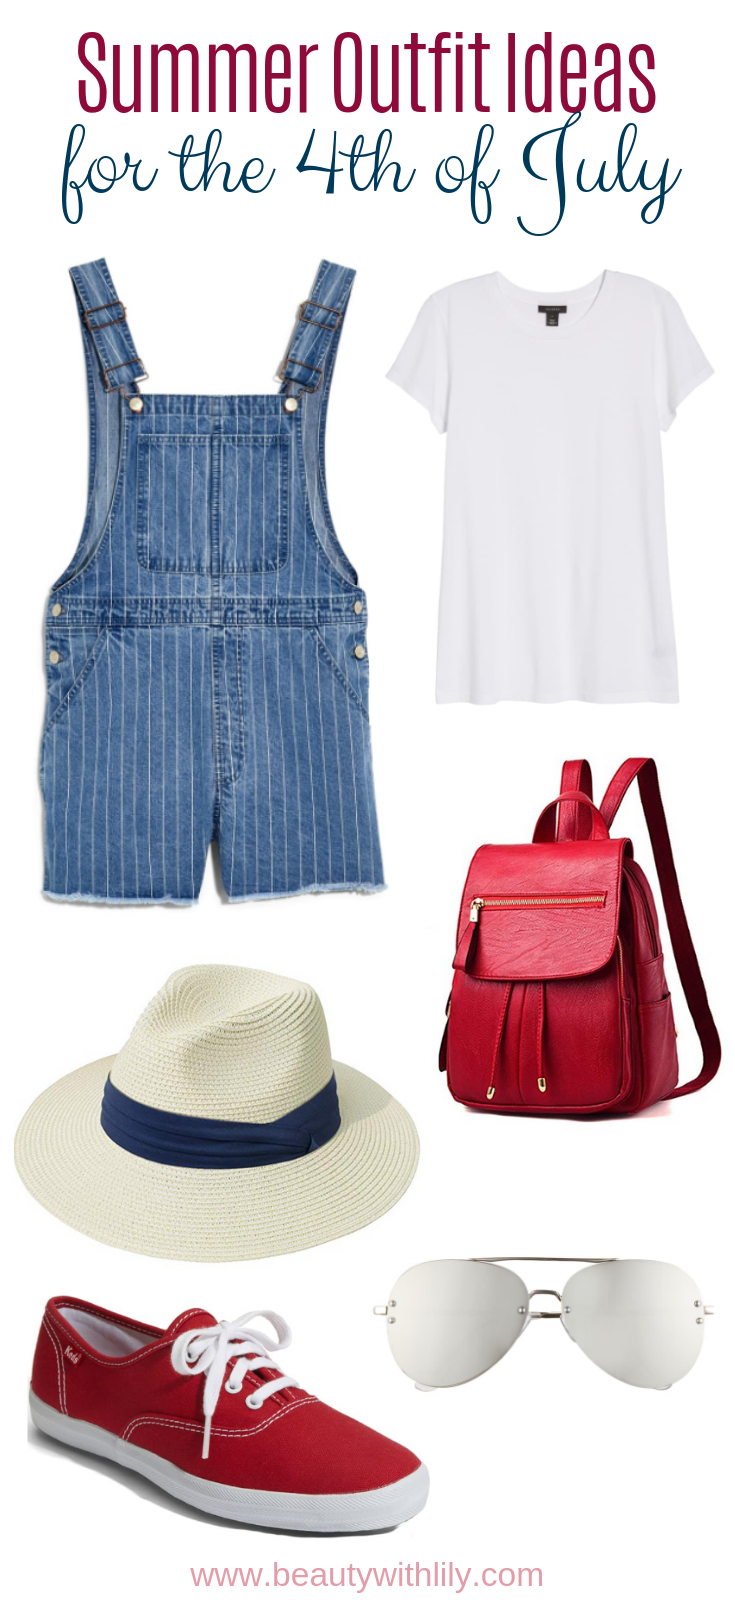 4th of July Outfit Inspiration // July 4th Fashion // Red White & Blue Outfits // Patriotic Outfit Ideas // Summer Outfit Ideas | Beauty With Lily